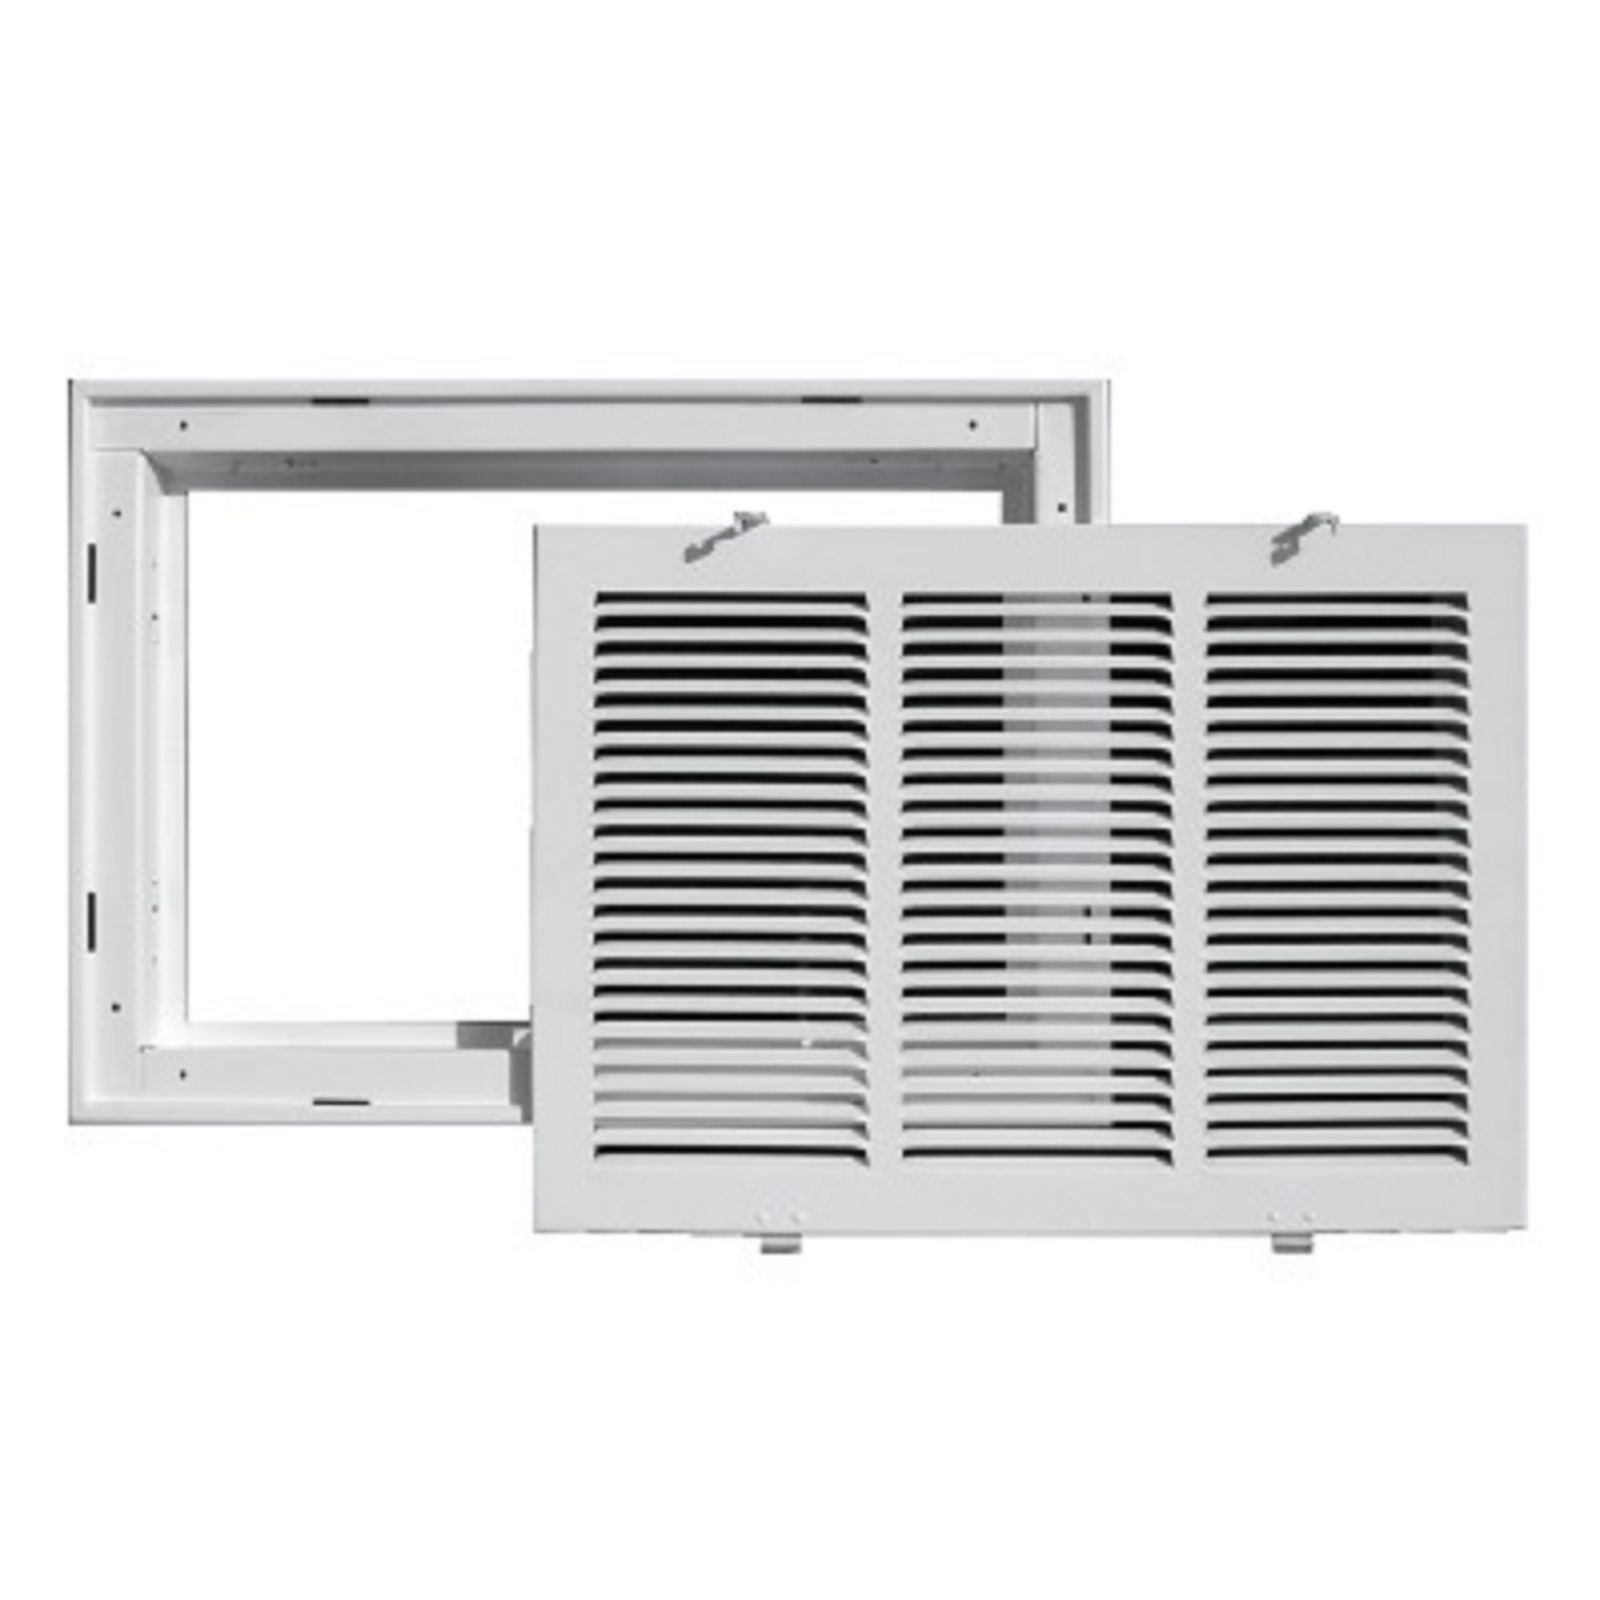 TRUaire 190RF 18X18 - Steel Return Air Filter Grille With Removable Face, White, 18" X 18"